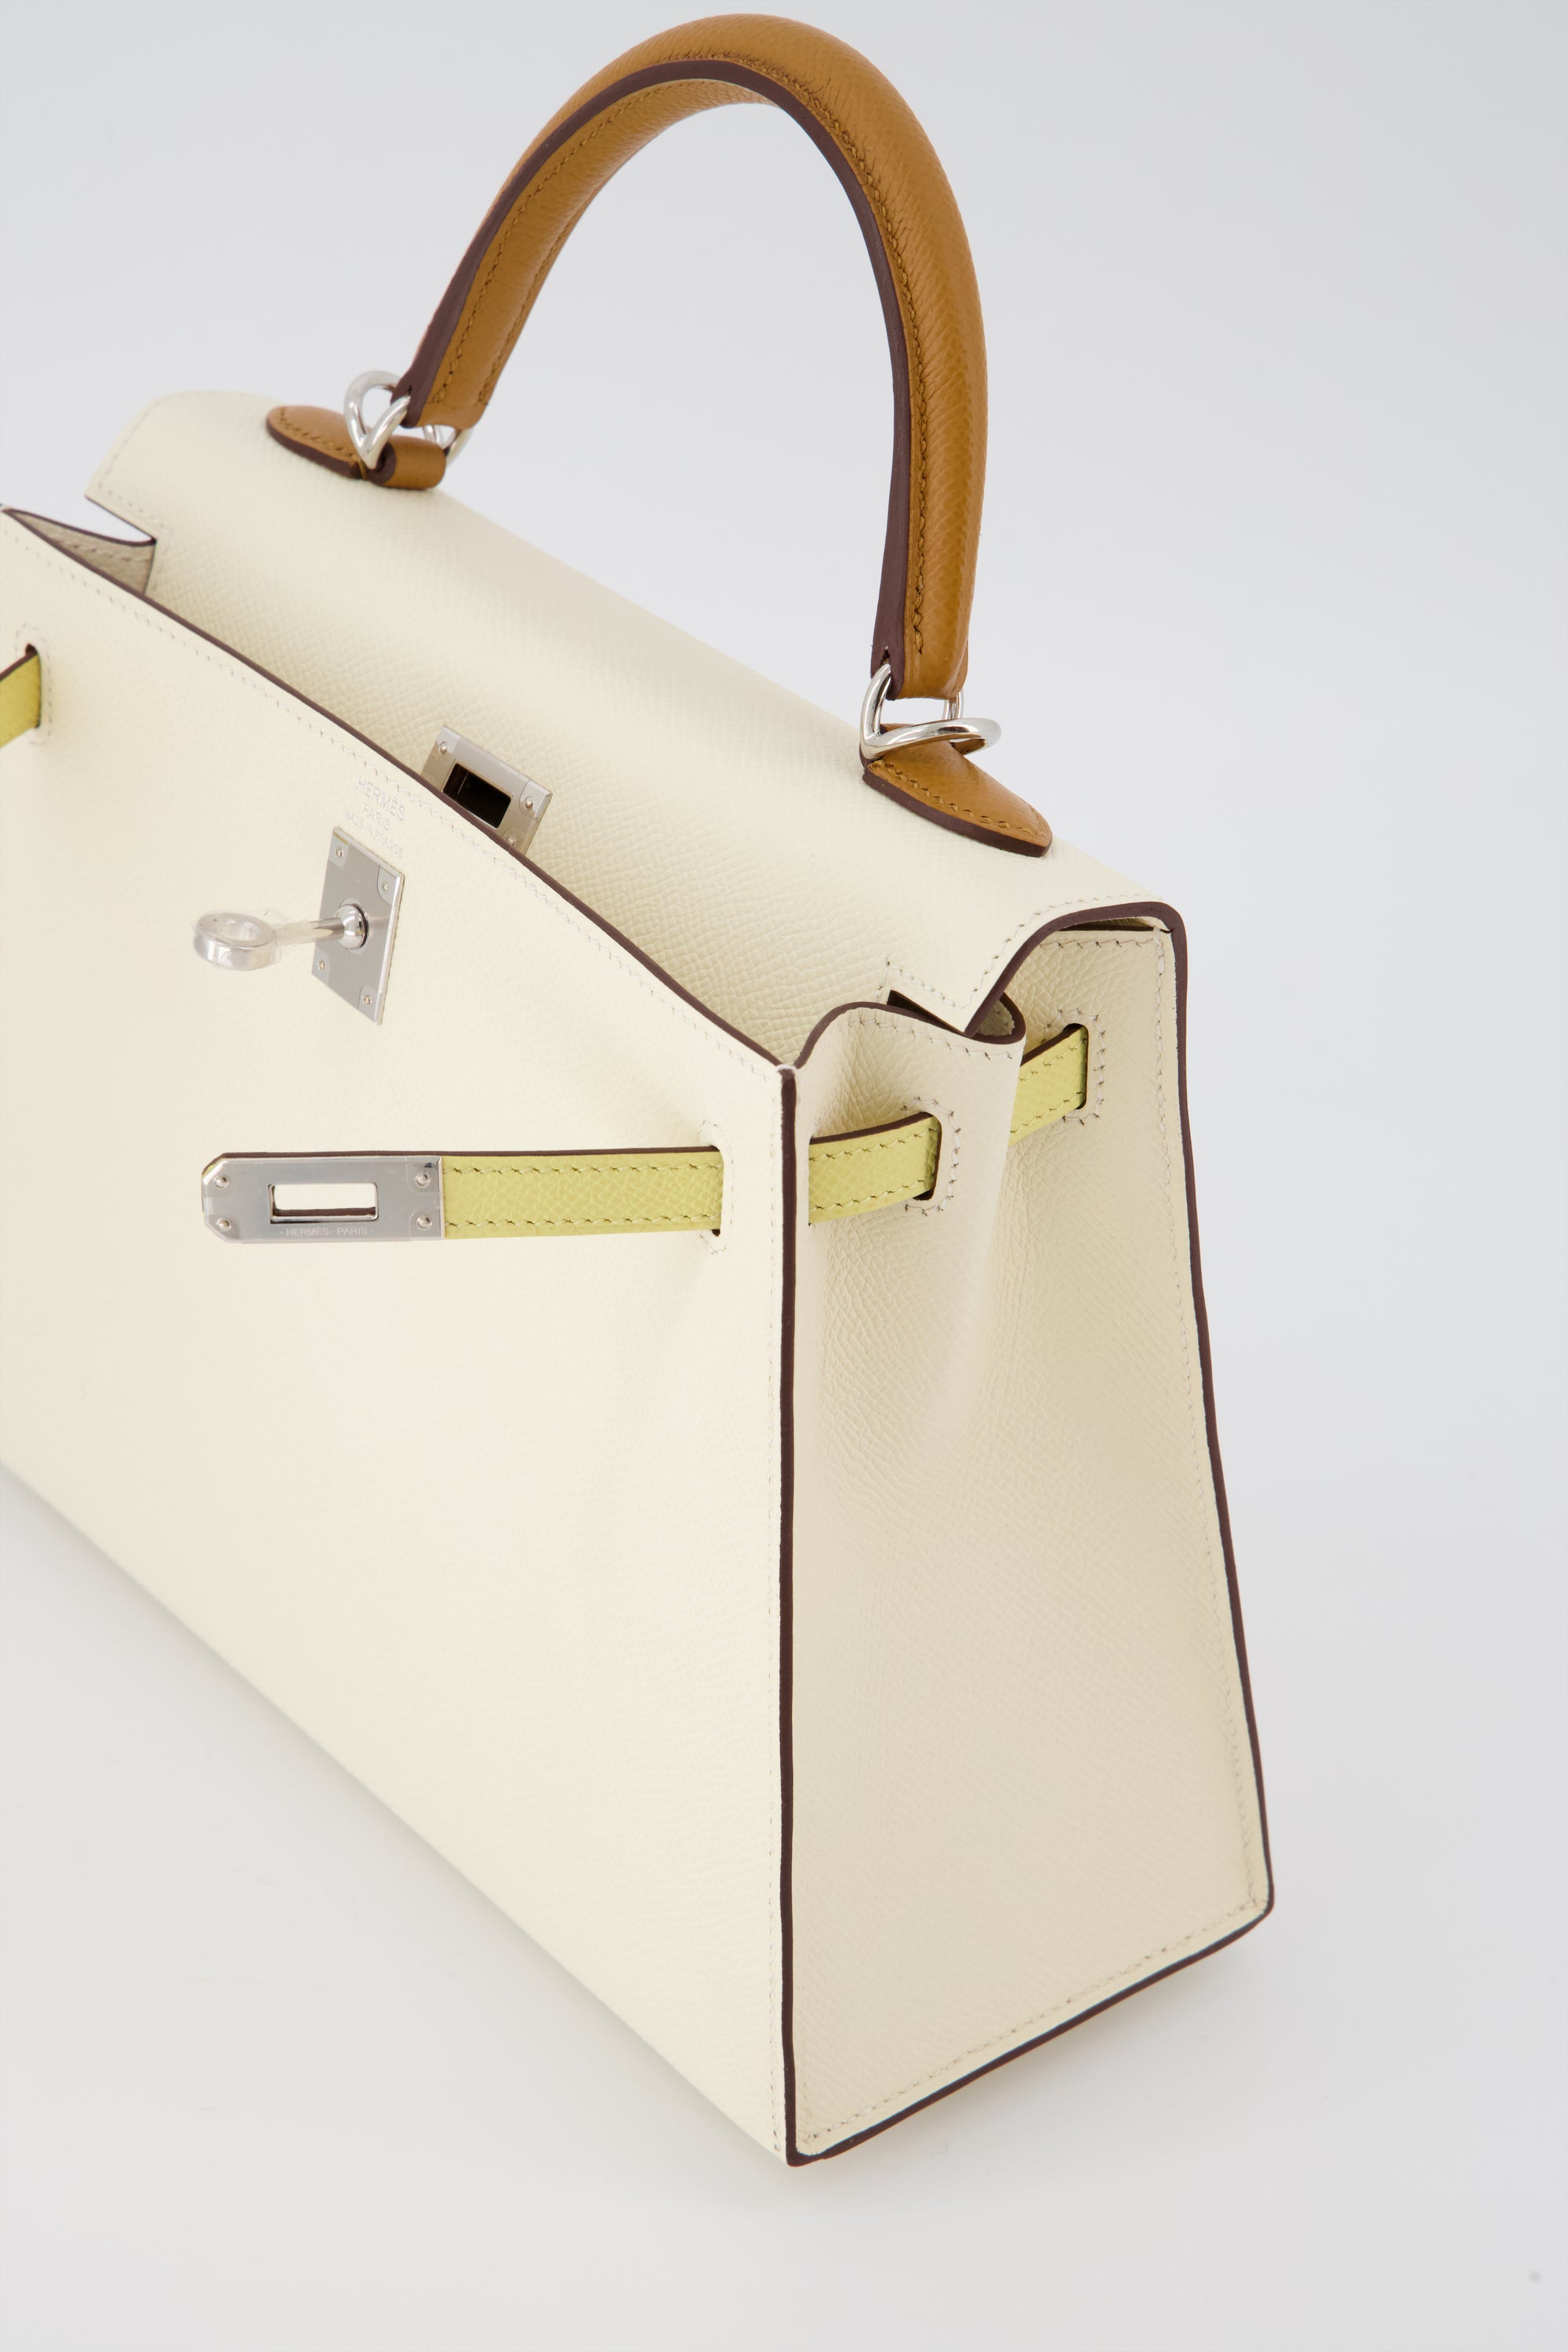 *Limited Edition* Hermes Kelly 25 Sellier Handbag Tri-Colour Nata Sesame Jaune Poussin.  Epsom Leather With Gold Hardware